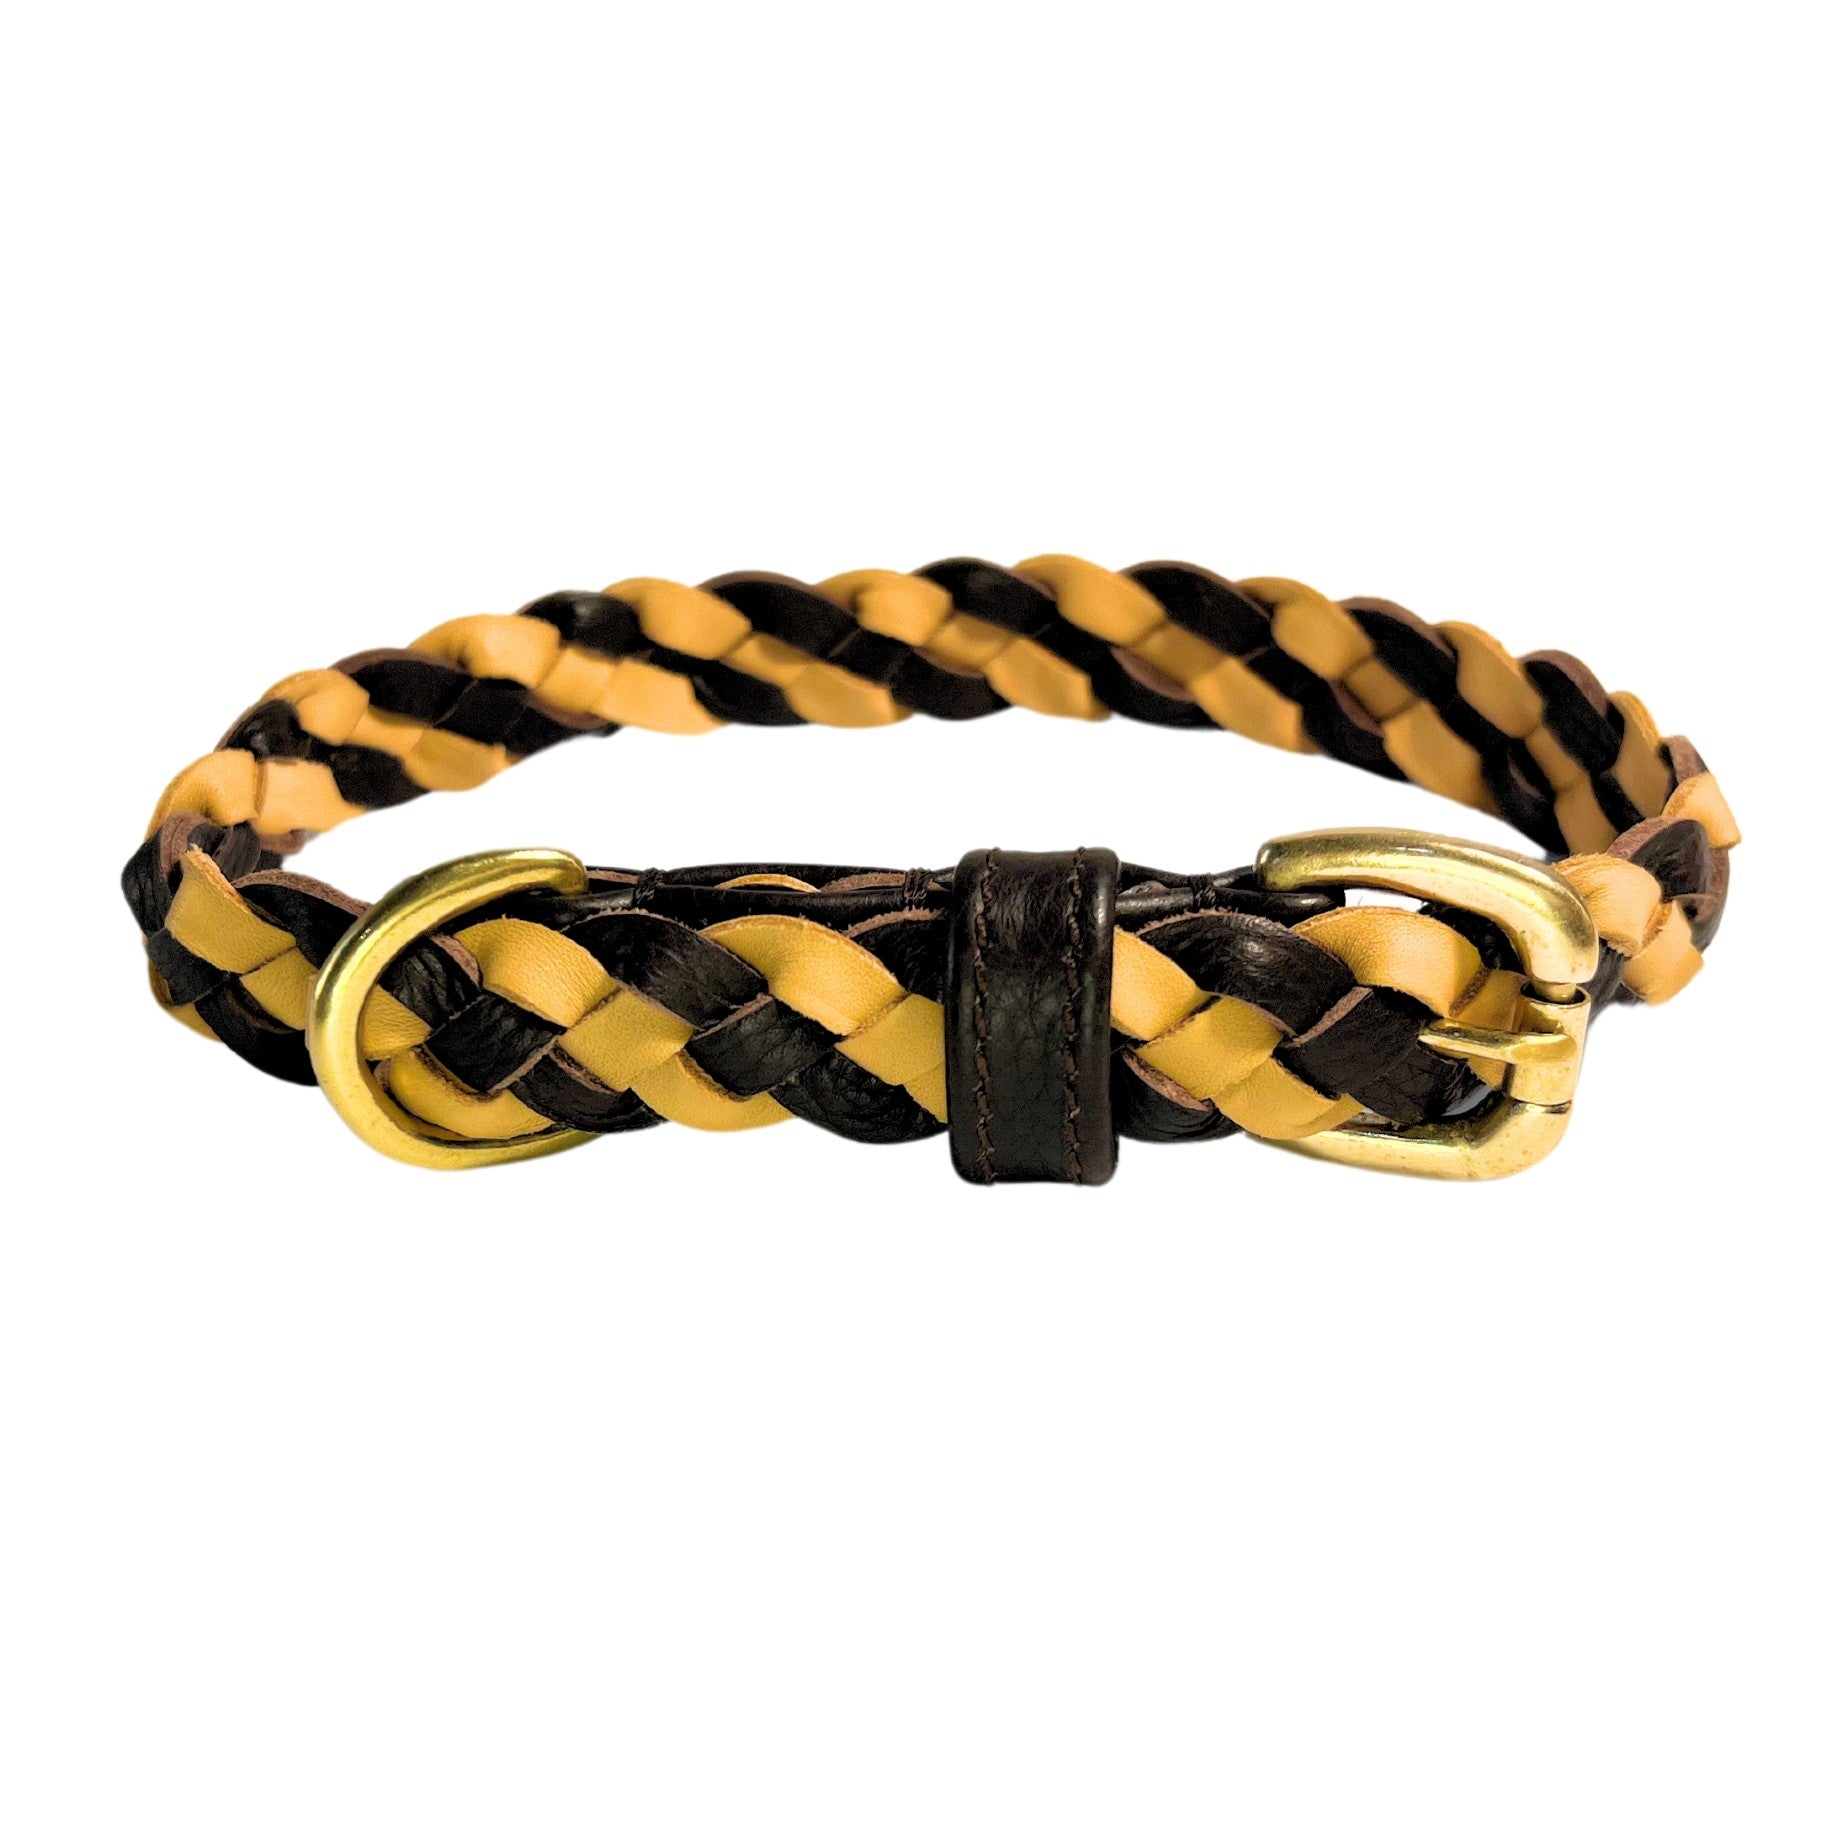 A LuLu Collar - chicory bracelet in black and yellow featuring a metallic clasp, isolated on a white background. The accessory exhibits a casual yet stylish design, suitable for everyday wear.